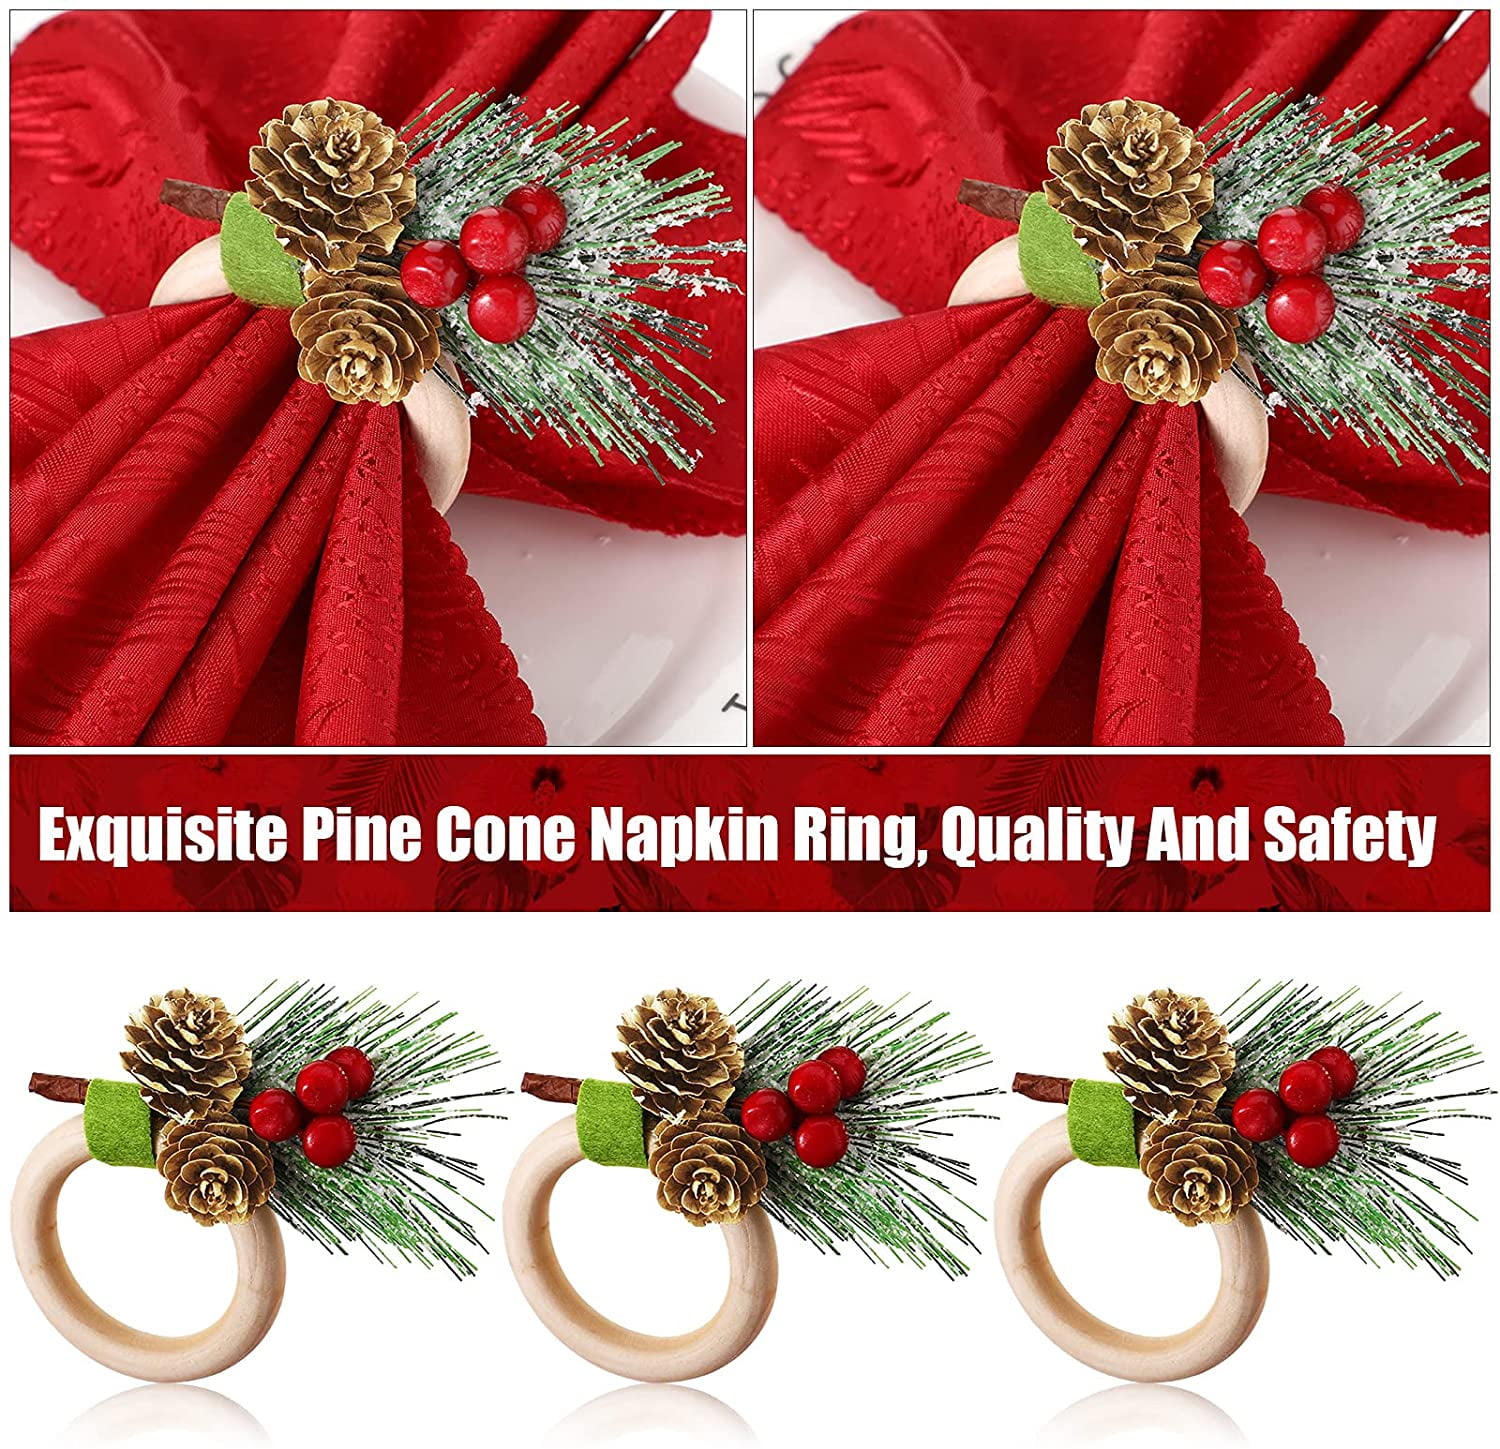 Classic Style 12 Pieces Pine Cones Christmas Napkin Holder Gold Napkin Rings Wood Christmas Napkin Rings Holder Christmas Napkin Ring Decor for Christmas Wedding Birthday Party Supplies